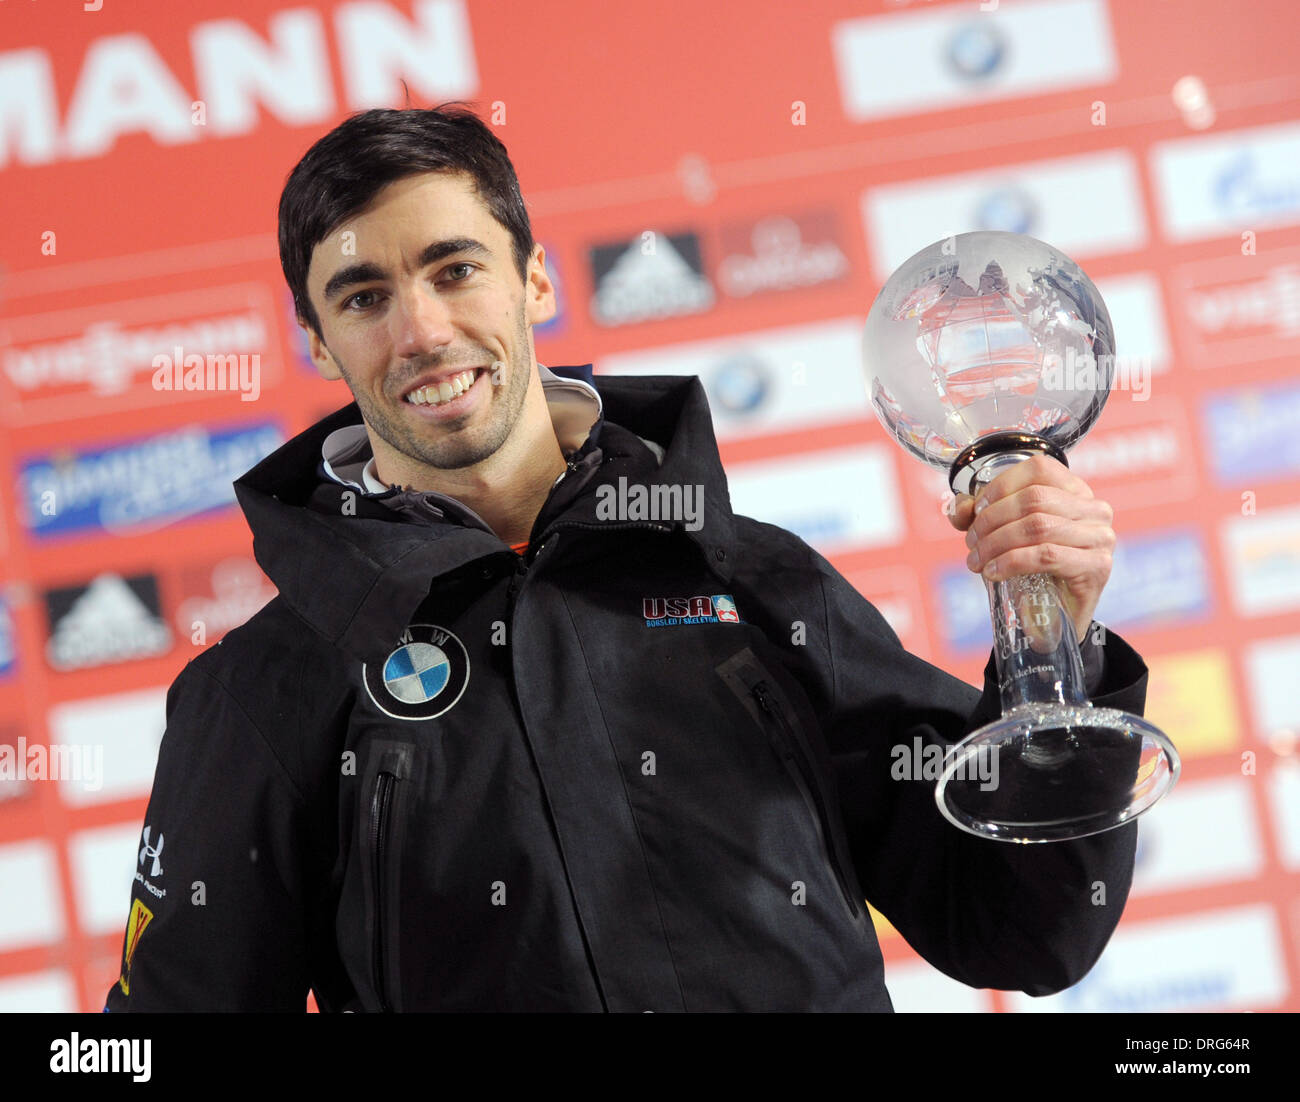 Koenigssee, Germany. 25th Jan, 2014. US American skeleton pilot Matthew Antoine holds his trophy after the race during the Skeleton World Cup in Koenigssee, Germany, 25 January 2014. Antoine was third placed. Photo: Tobias Hase/dpa/Alamy Live News Stock Photo